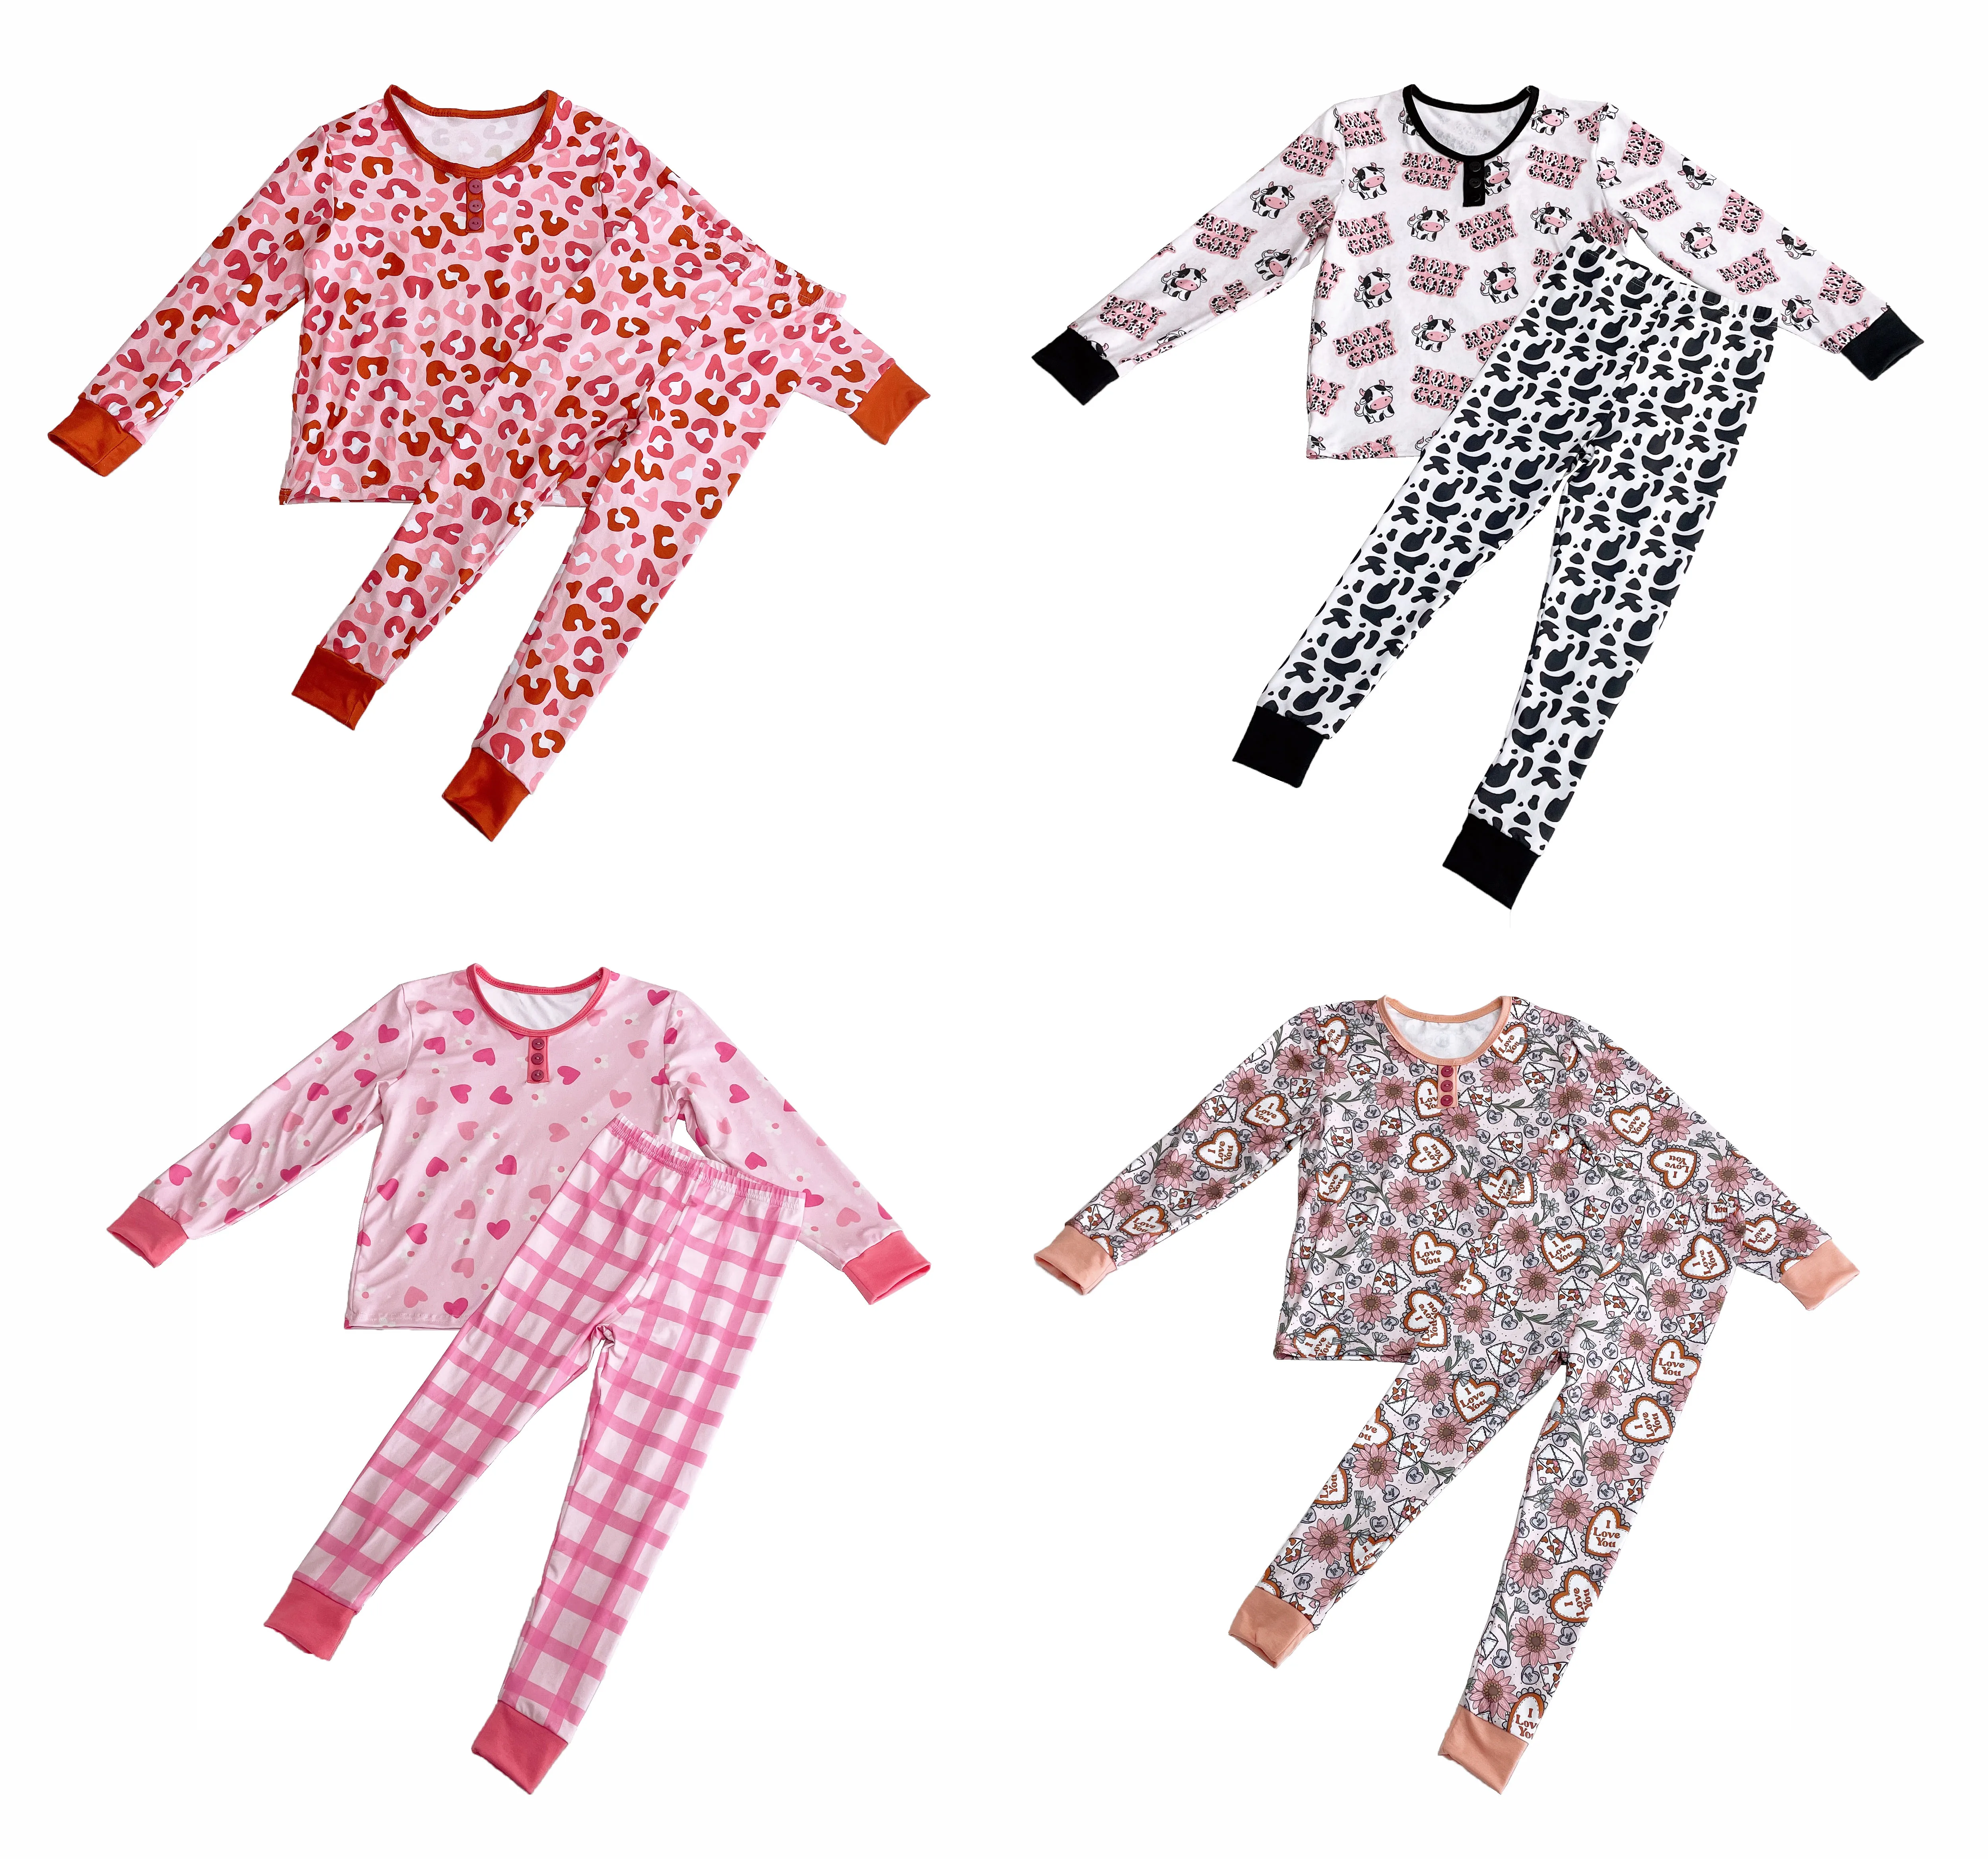 

Free Shipping Toddler Kids Pajamas Two Piece Sets Girl's Long Sleeve Floral Suits Pajamas Lounge Sets, Picture shows